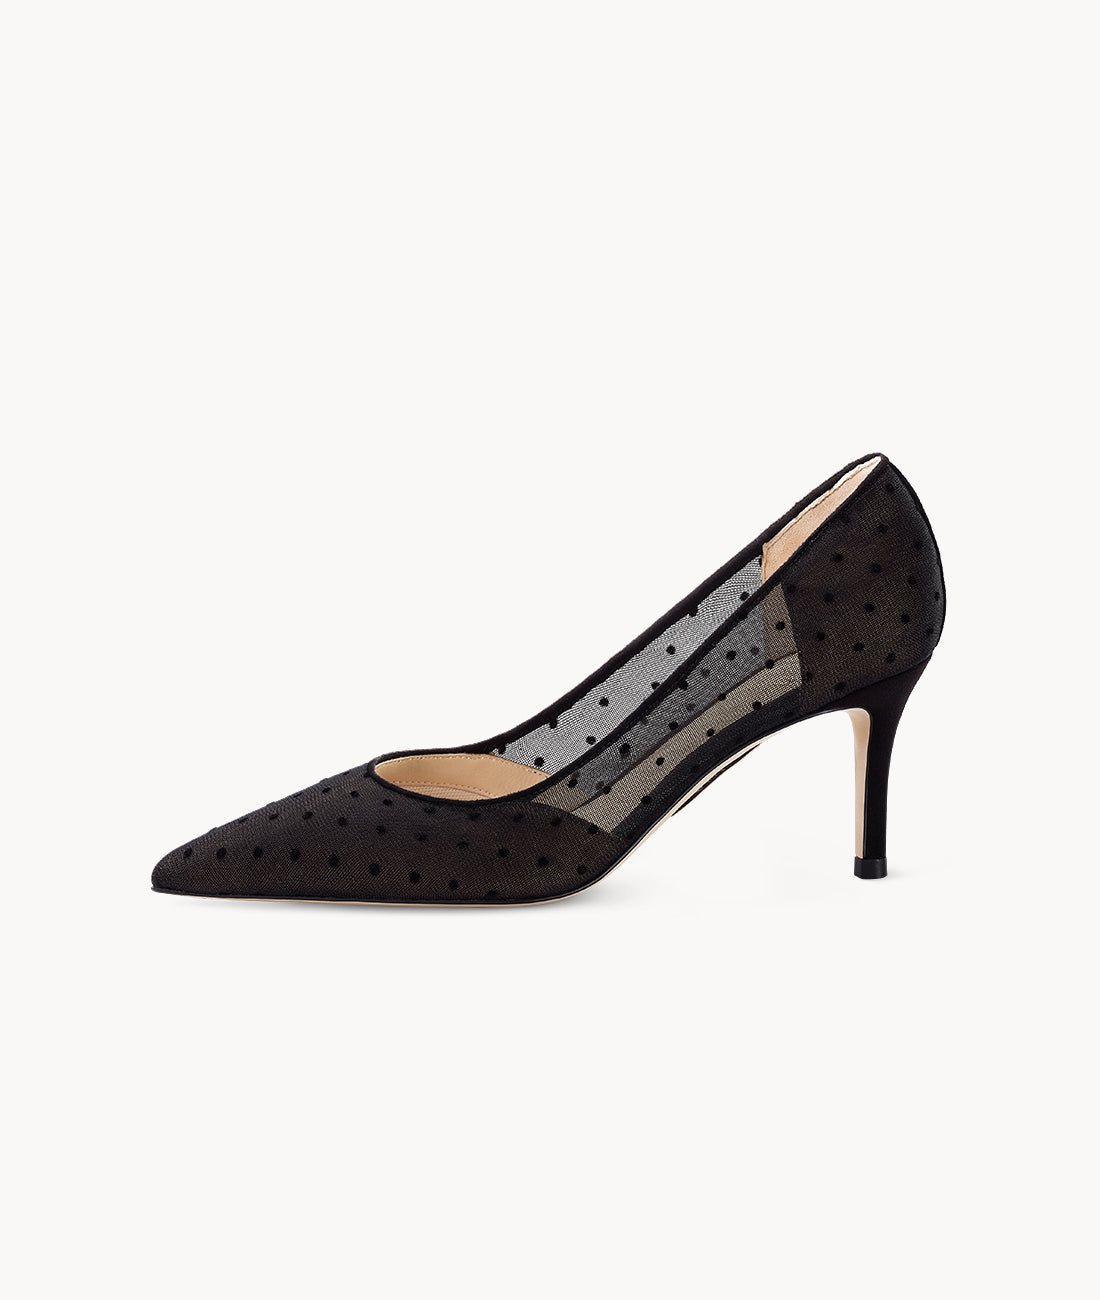 Rose Anonyme 4.0 Pumps 7or9